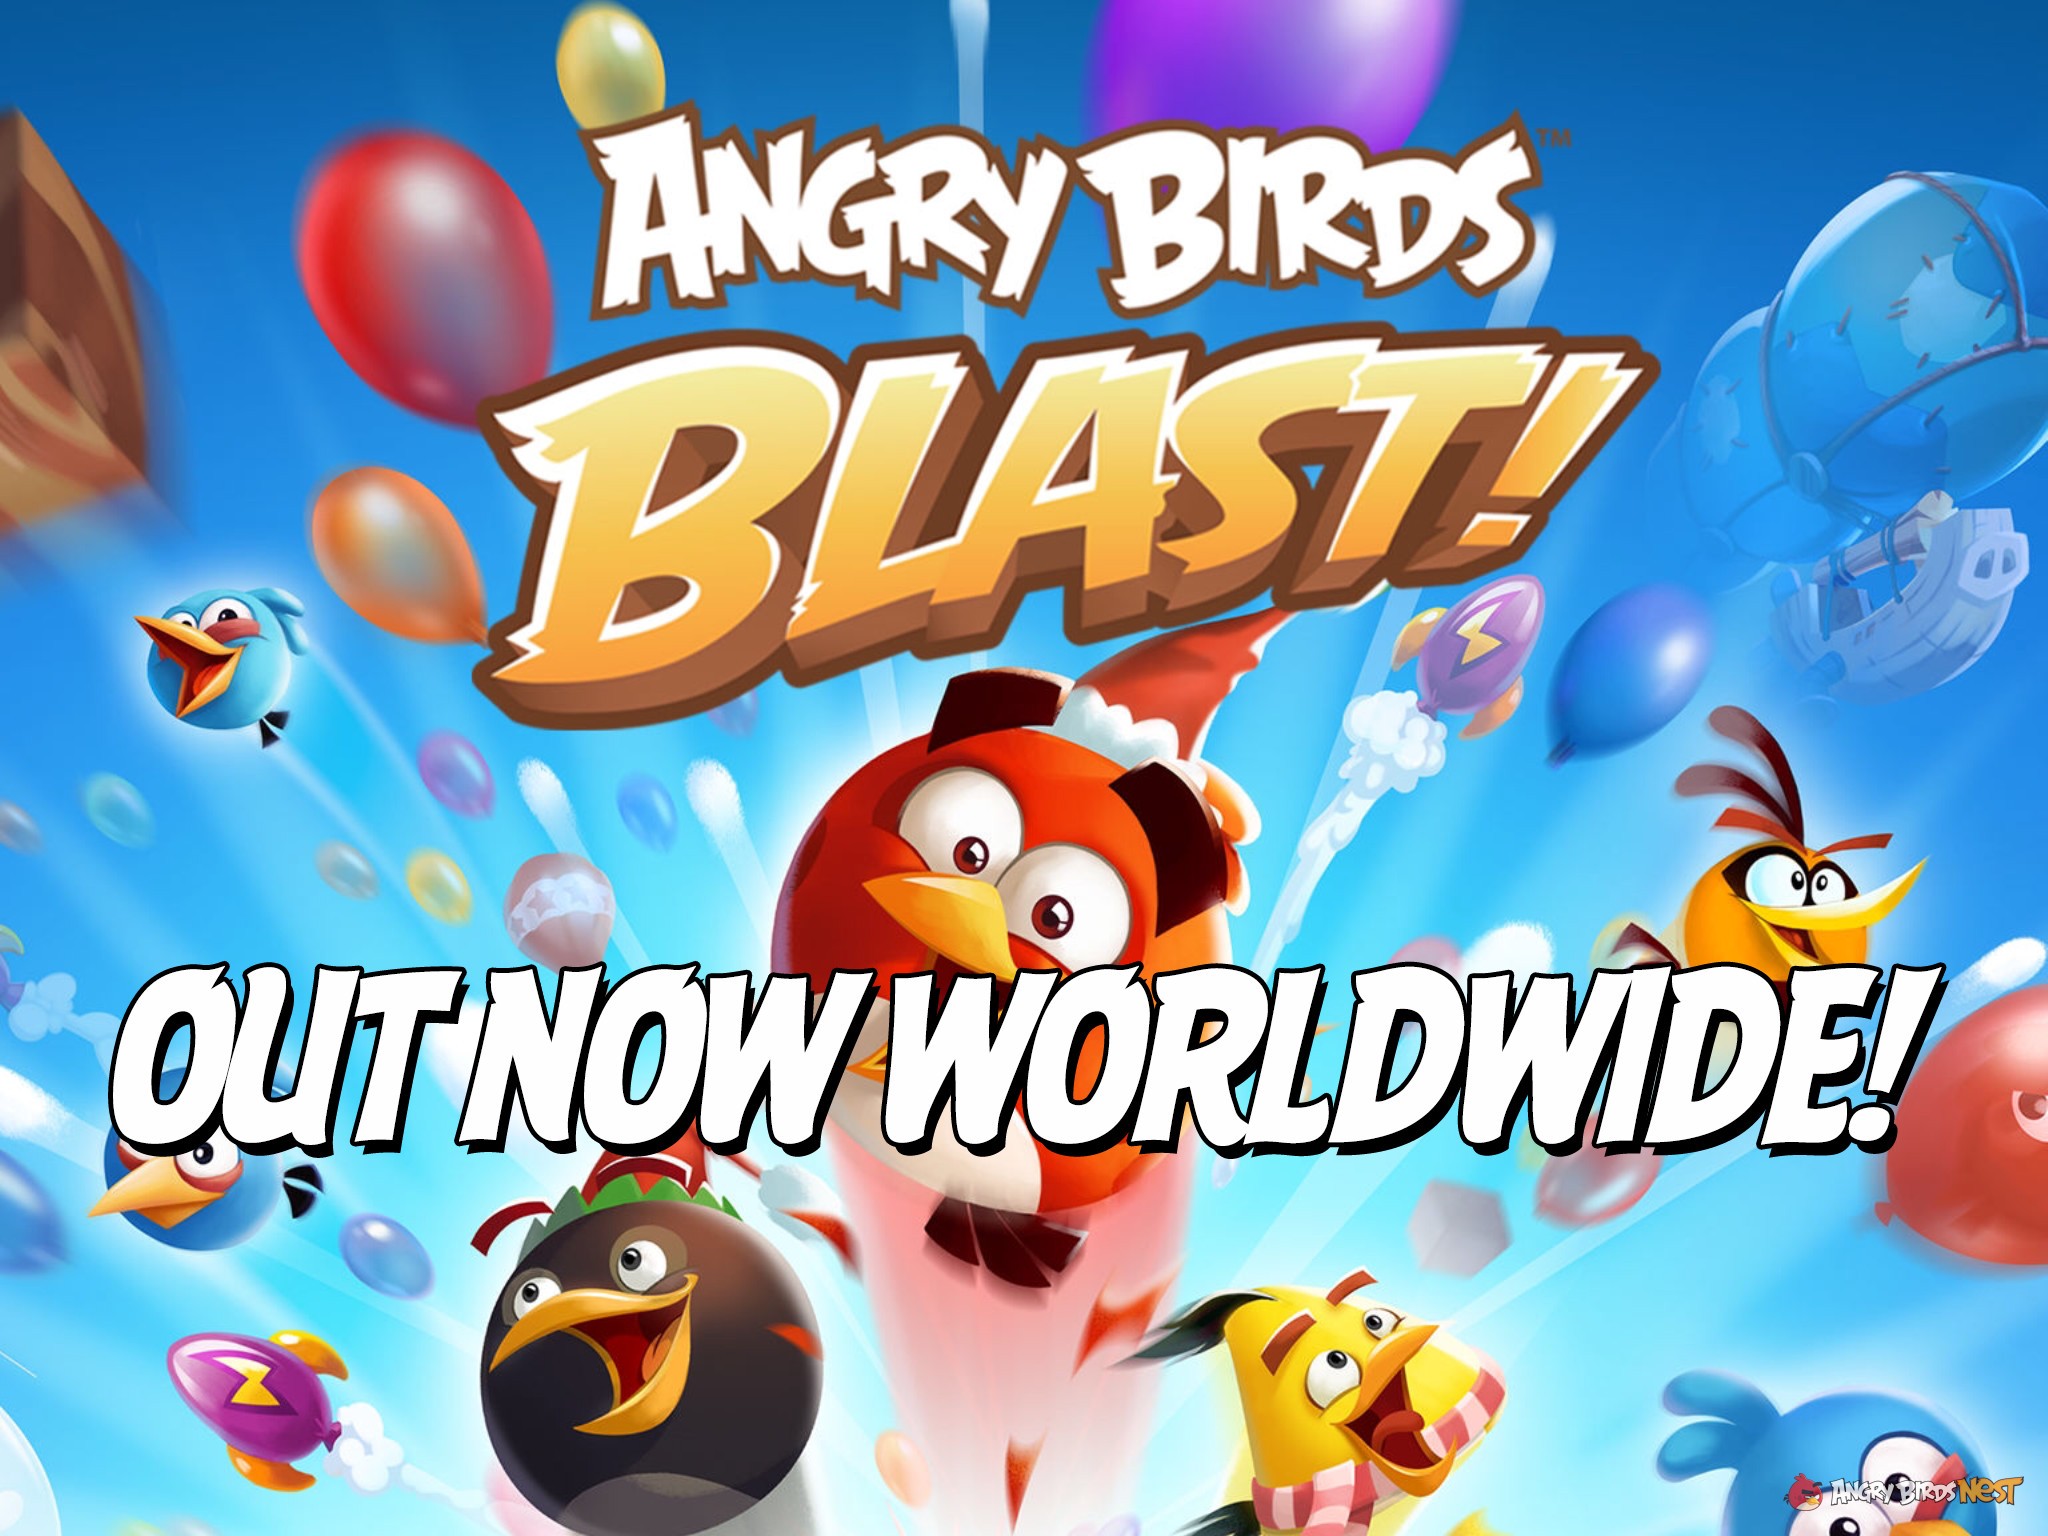 http://www.angrybirdsnest.com/wp-content/uploads/2016/12/Angry-Birds-Blast-Out-Now-Worldwide.jpg